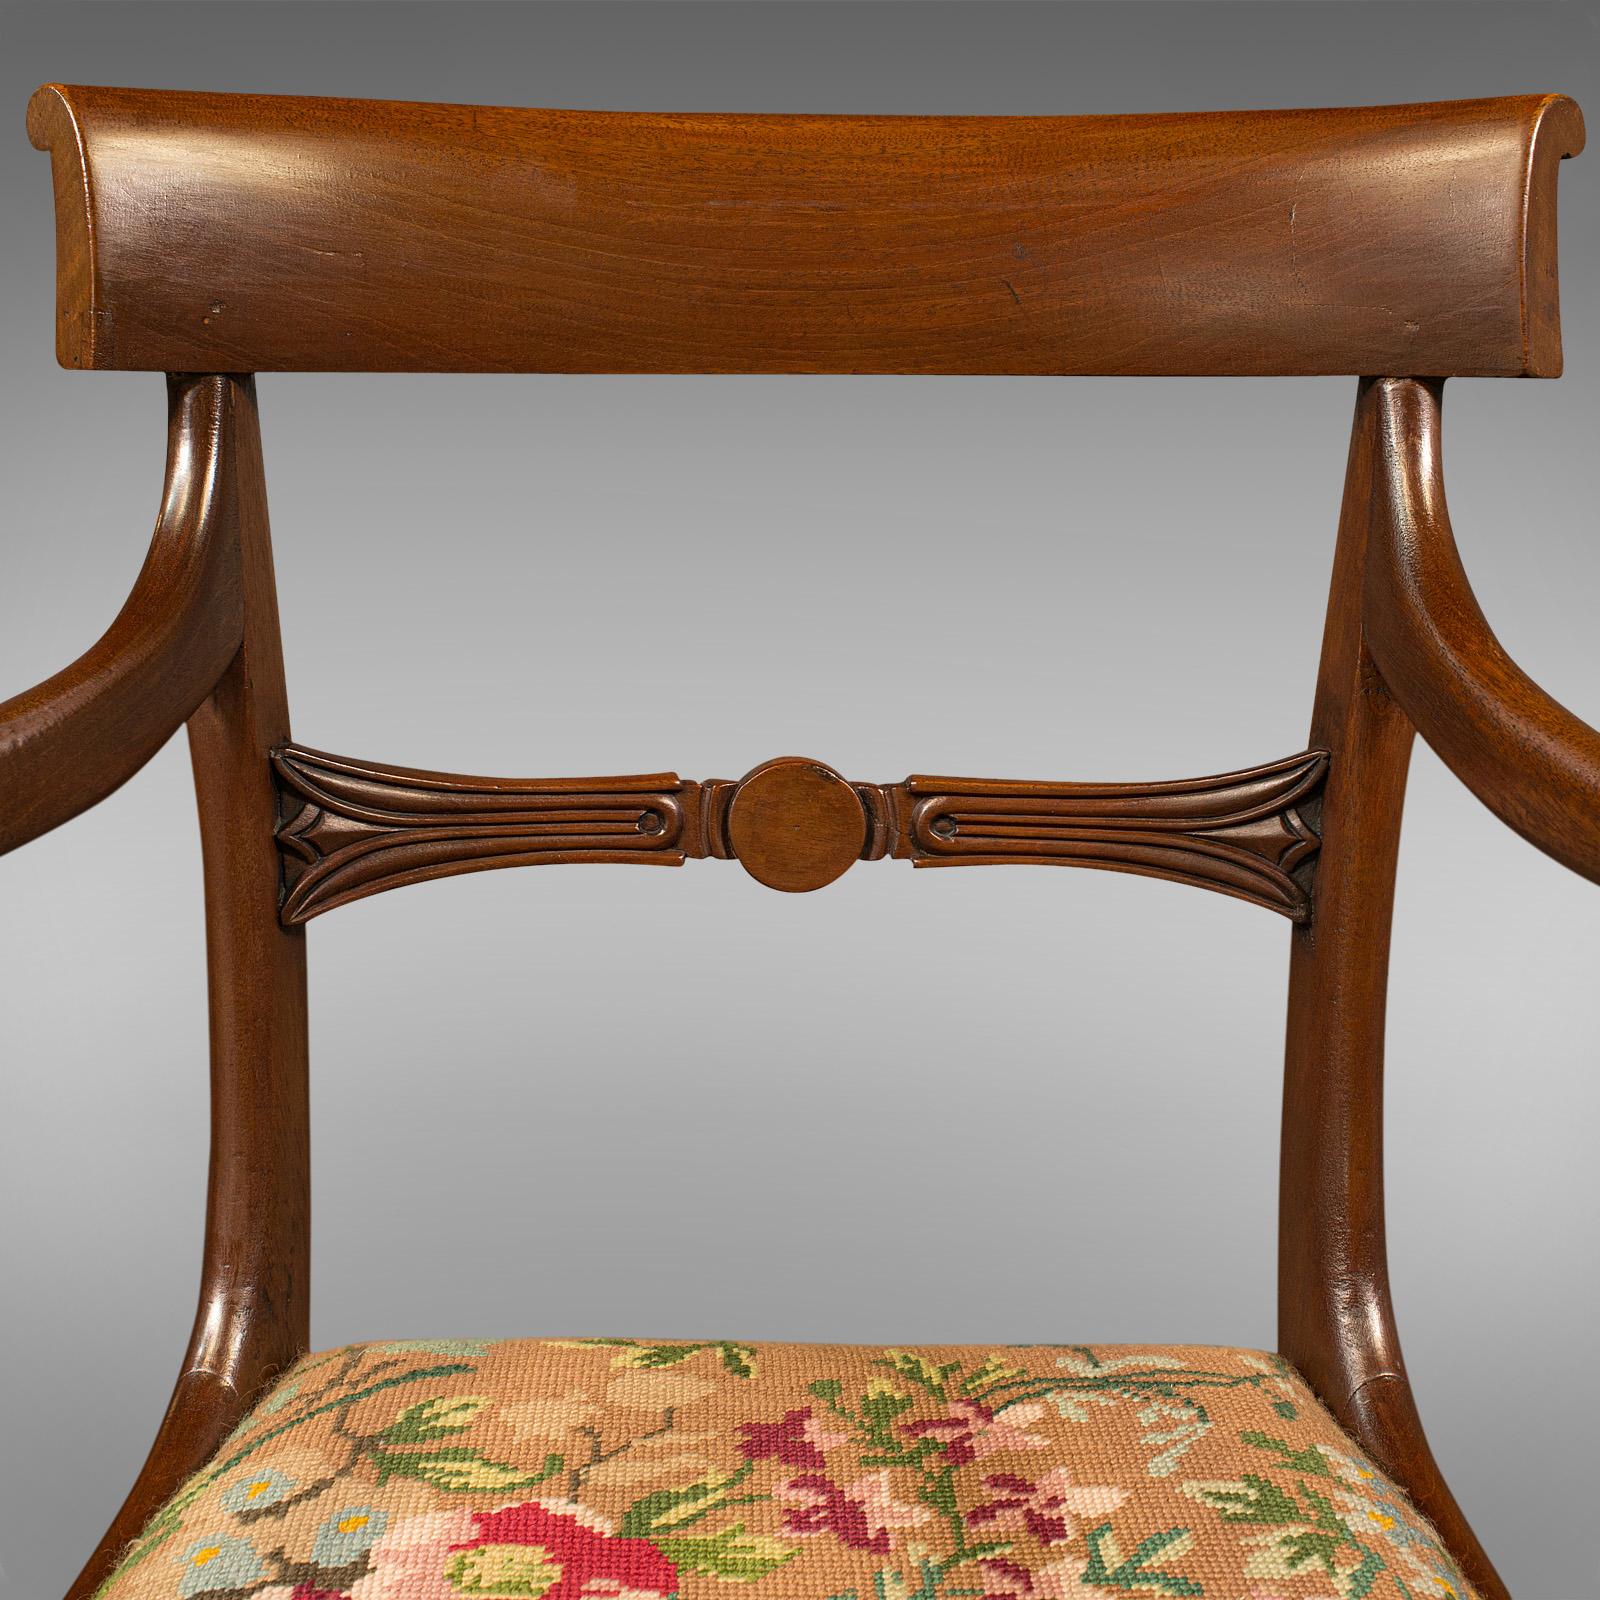 Antique Scroll Arm Chair, English, Armchair, Desk, Needlepoint, Regency, C.1830 For Sale 3